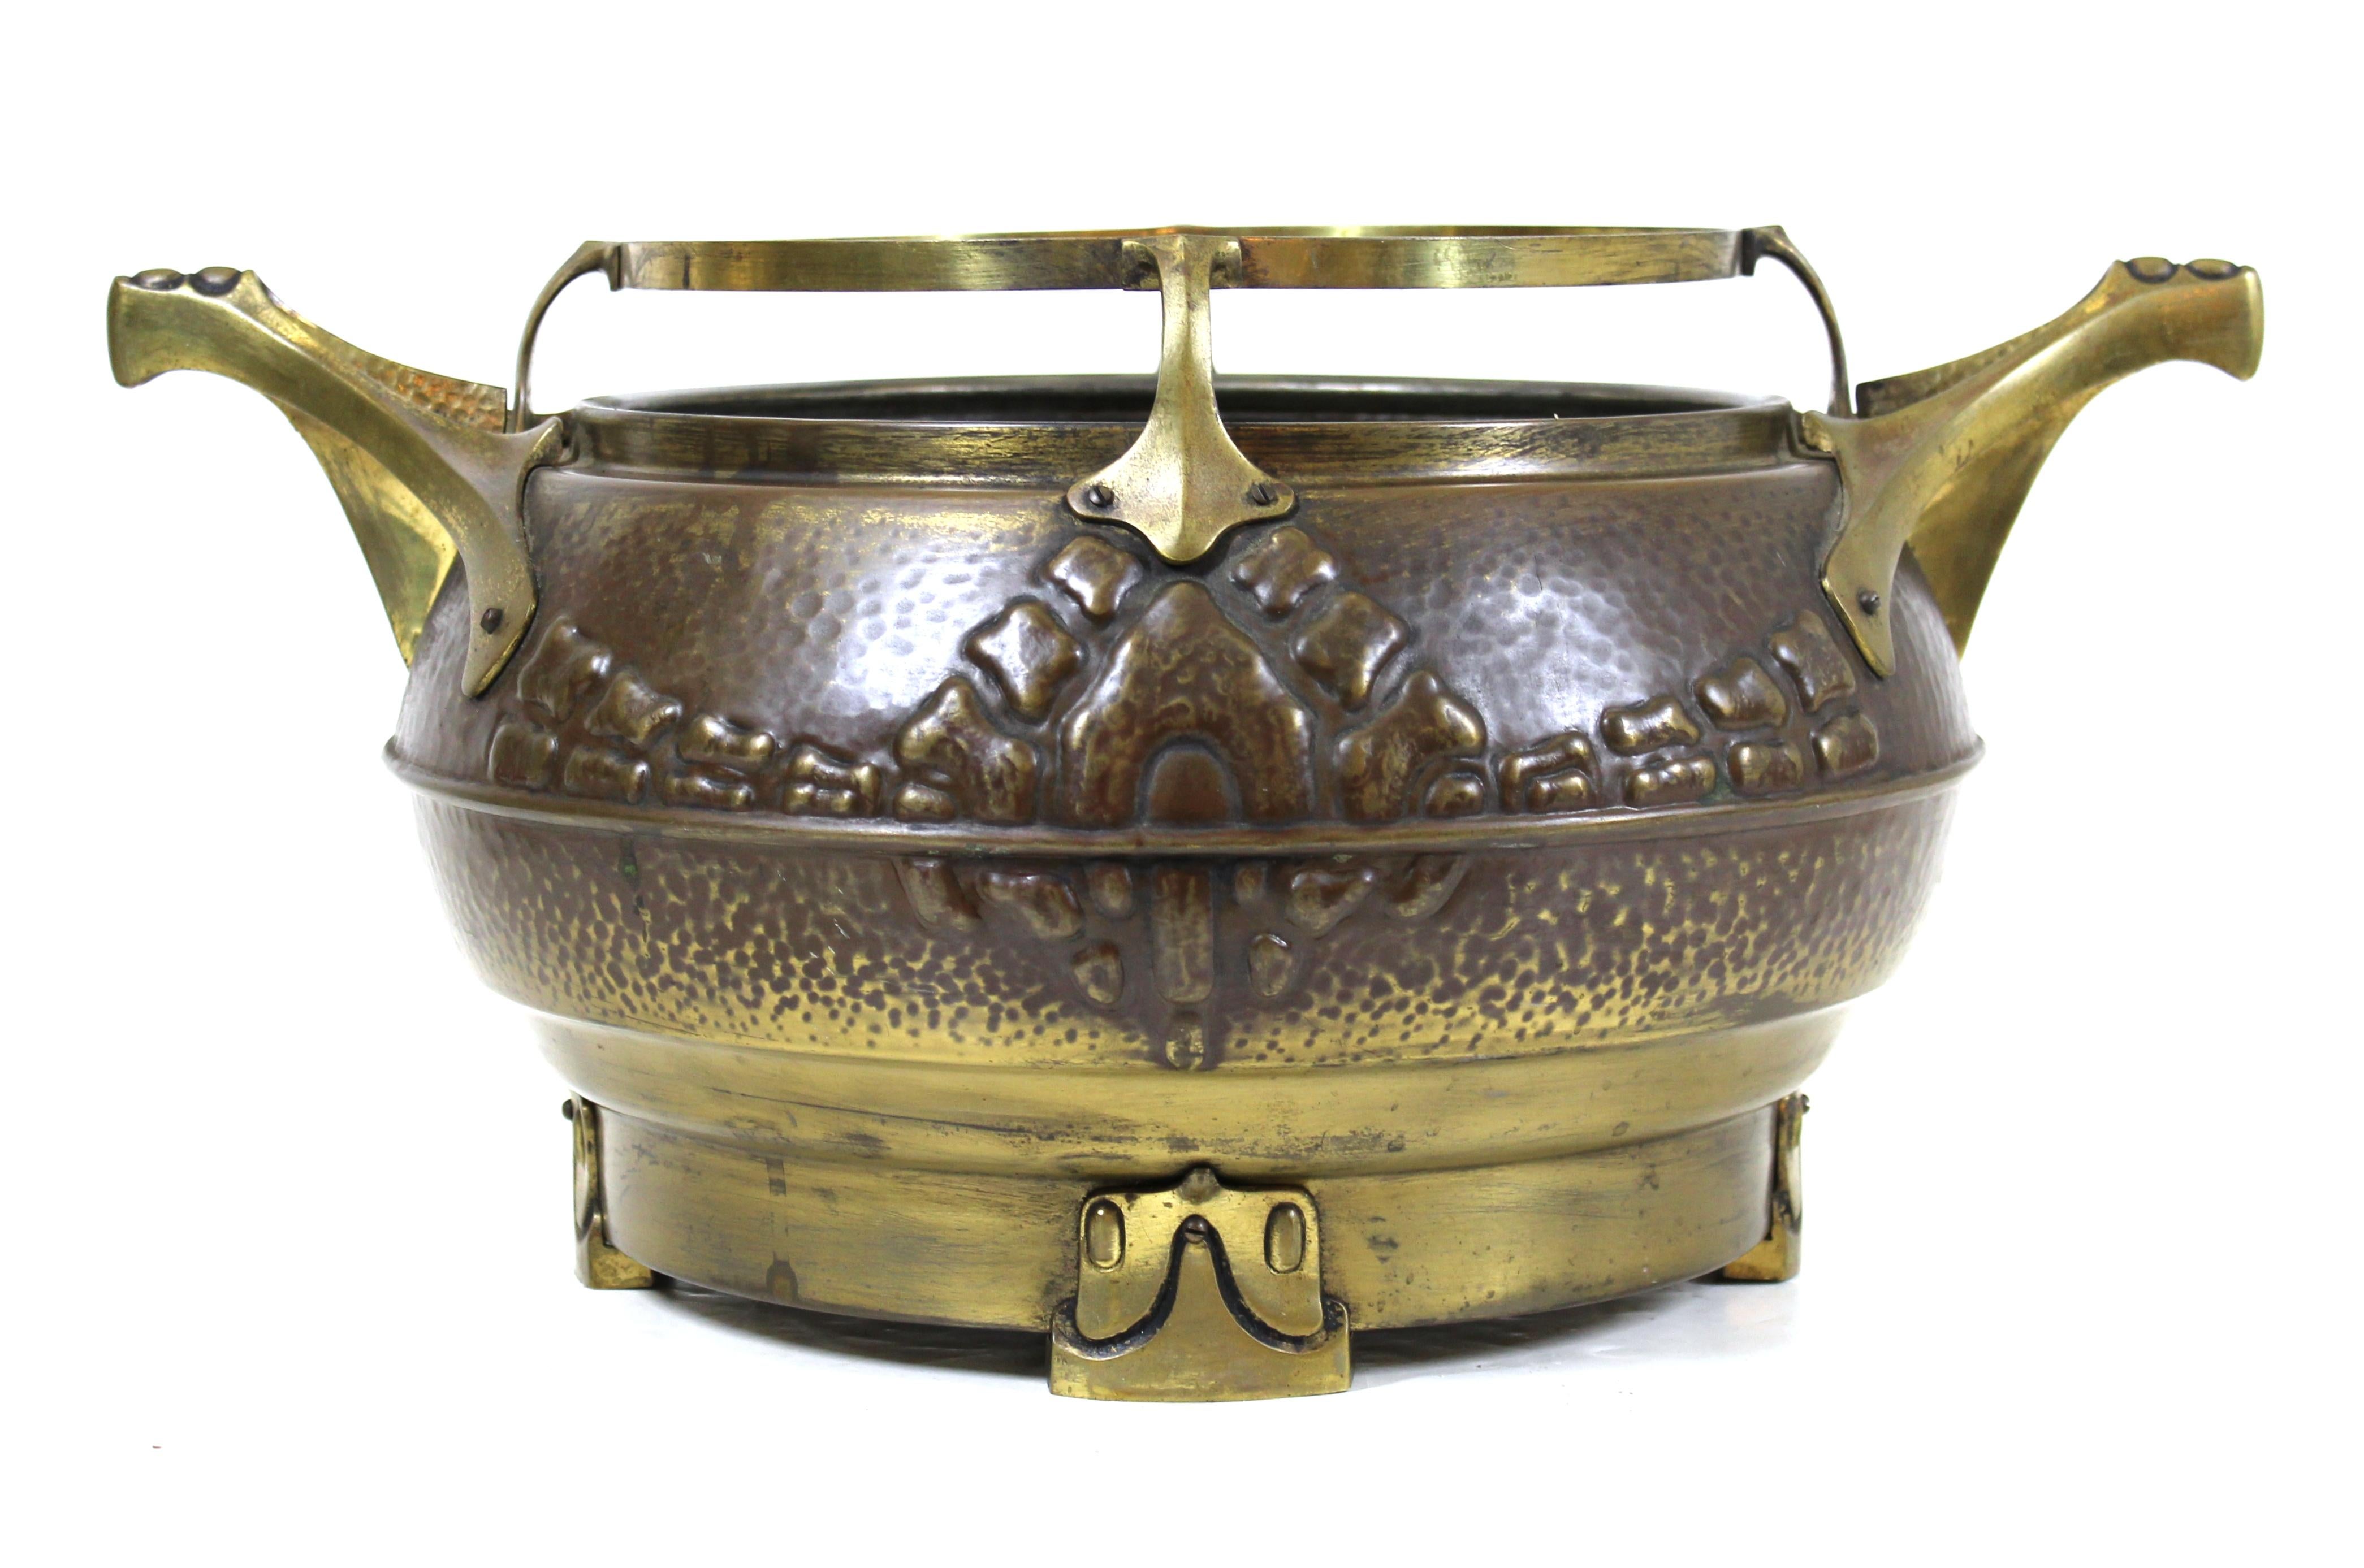 German Jugendstil jardinière planter with reptilian design motif in repousse brass with bronze handles, made in the 1900s. In remarkable antique condition with age-appropriate wear.